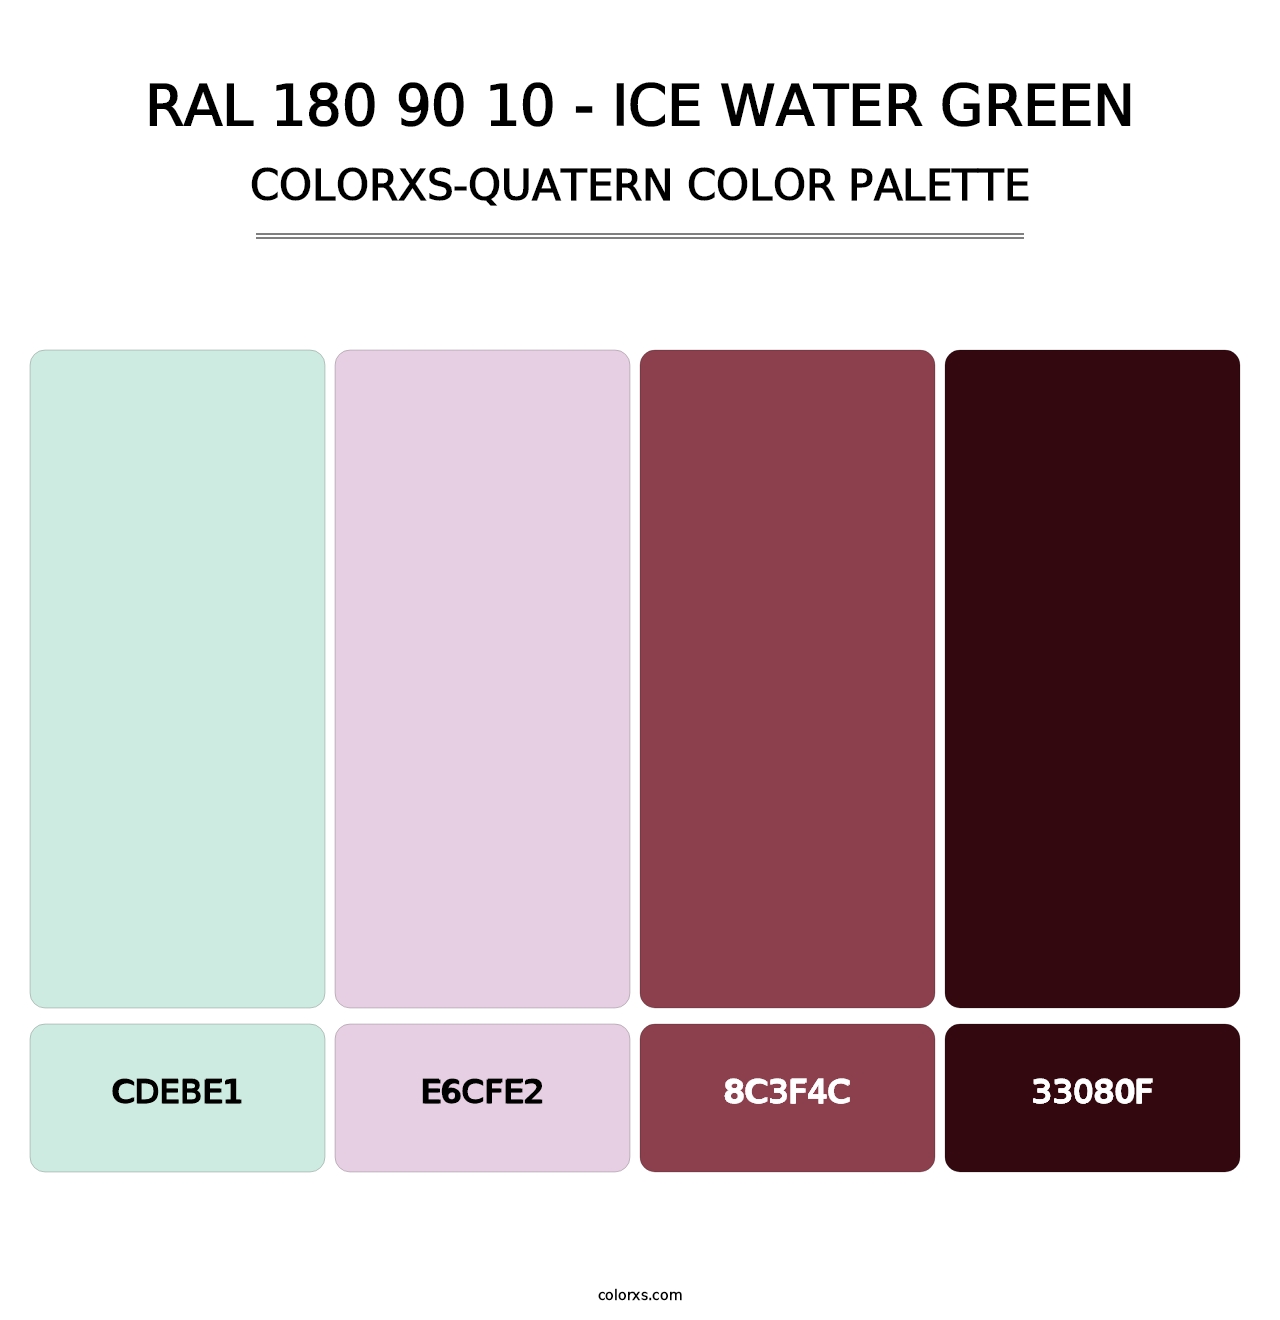 RAL 180 90 10 - Ice Water Green - Colorxs Quatern Palette